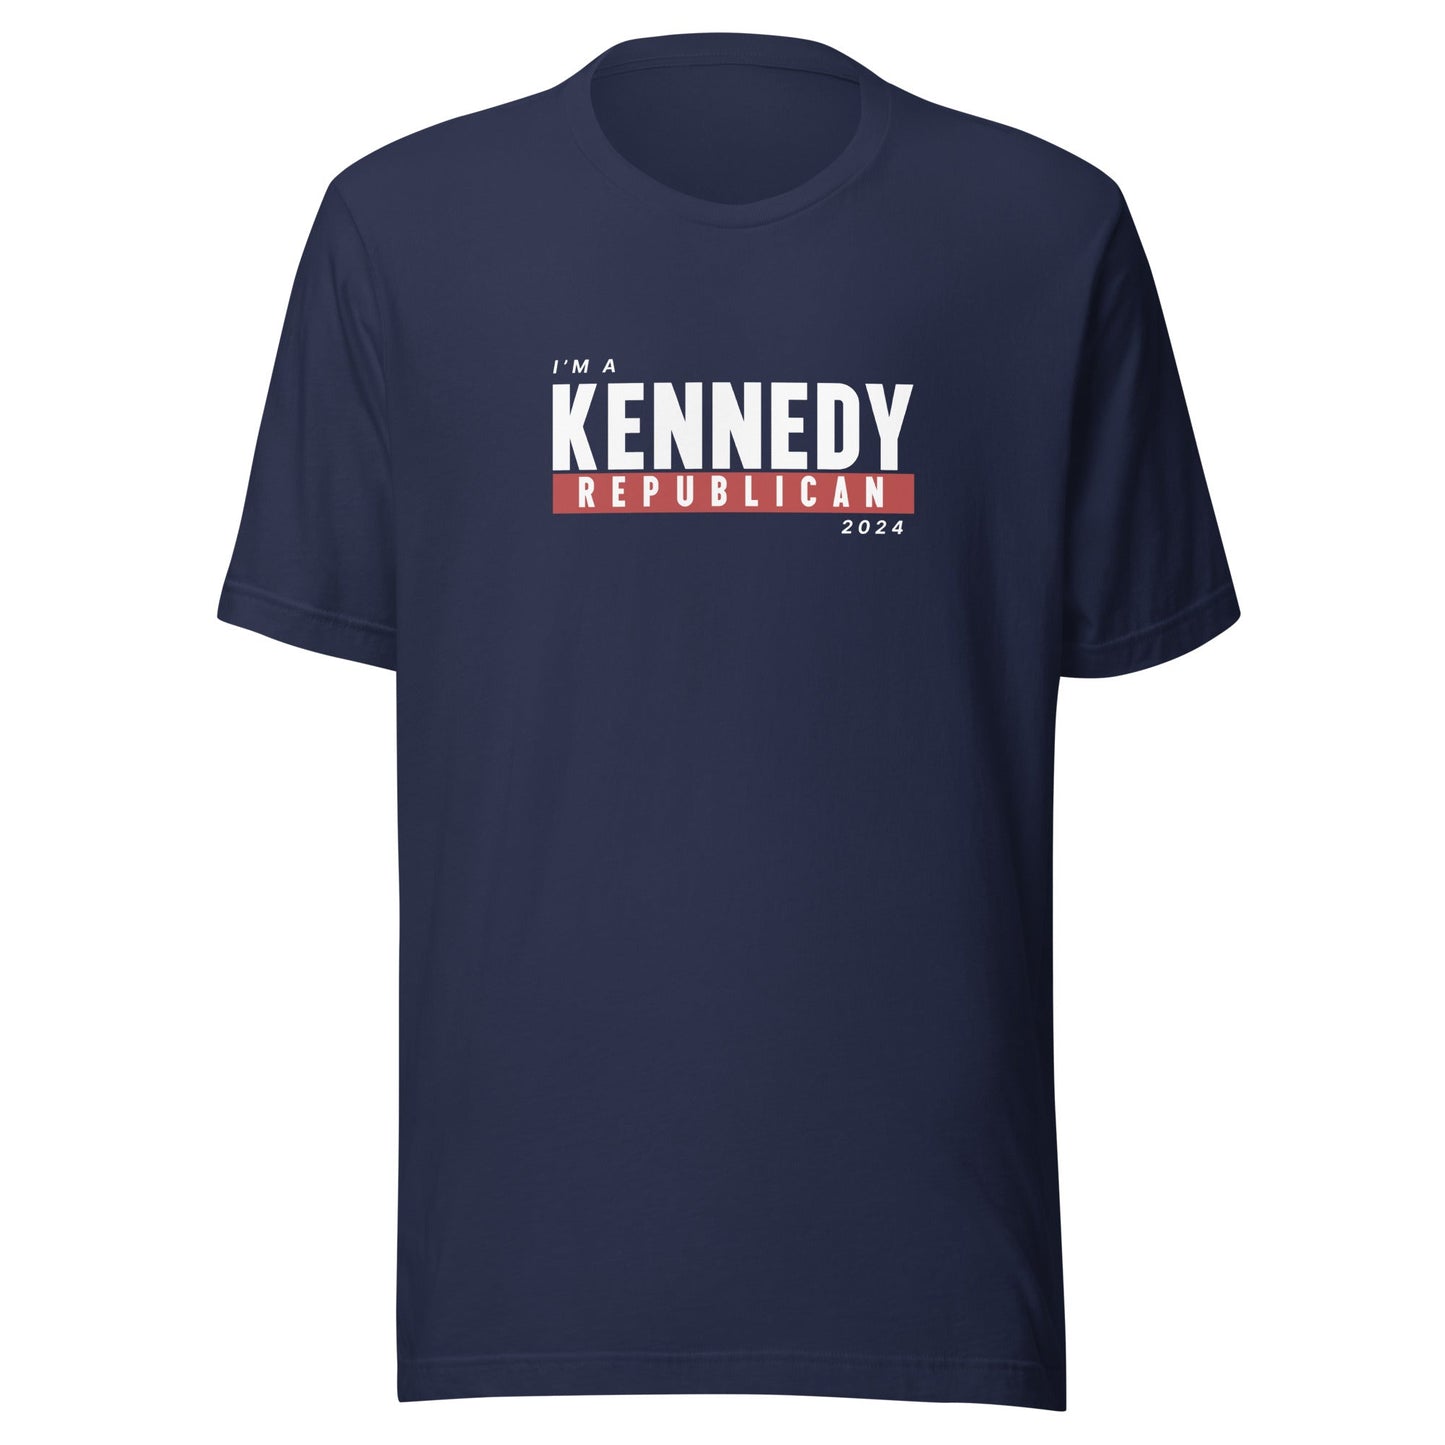 I'm a Kennedy Republican Unisex Tee - TEAM KENNEDY. All rights reserved